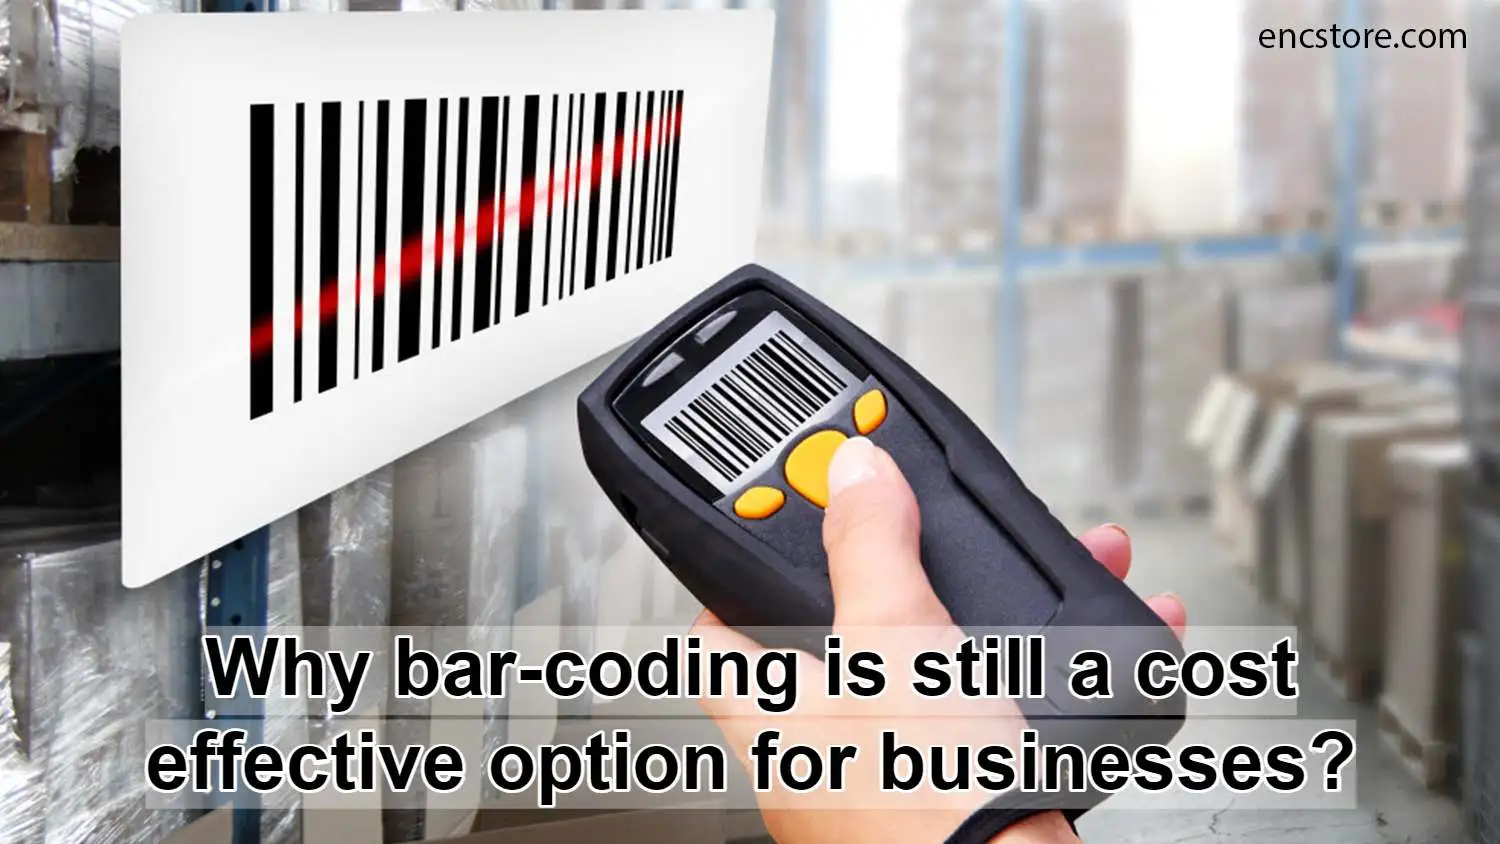 Why bar-coding is still a cost effective option for businesses